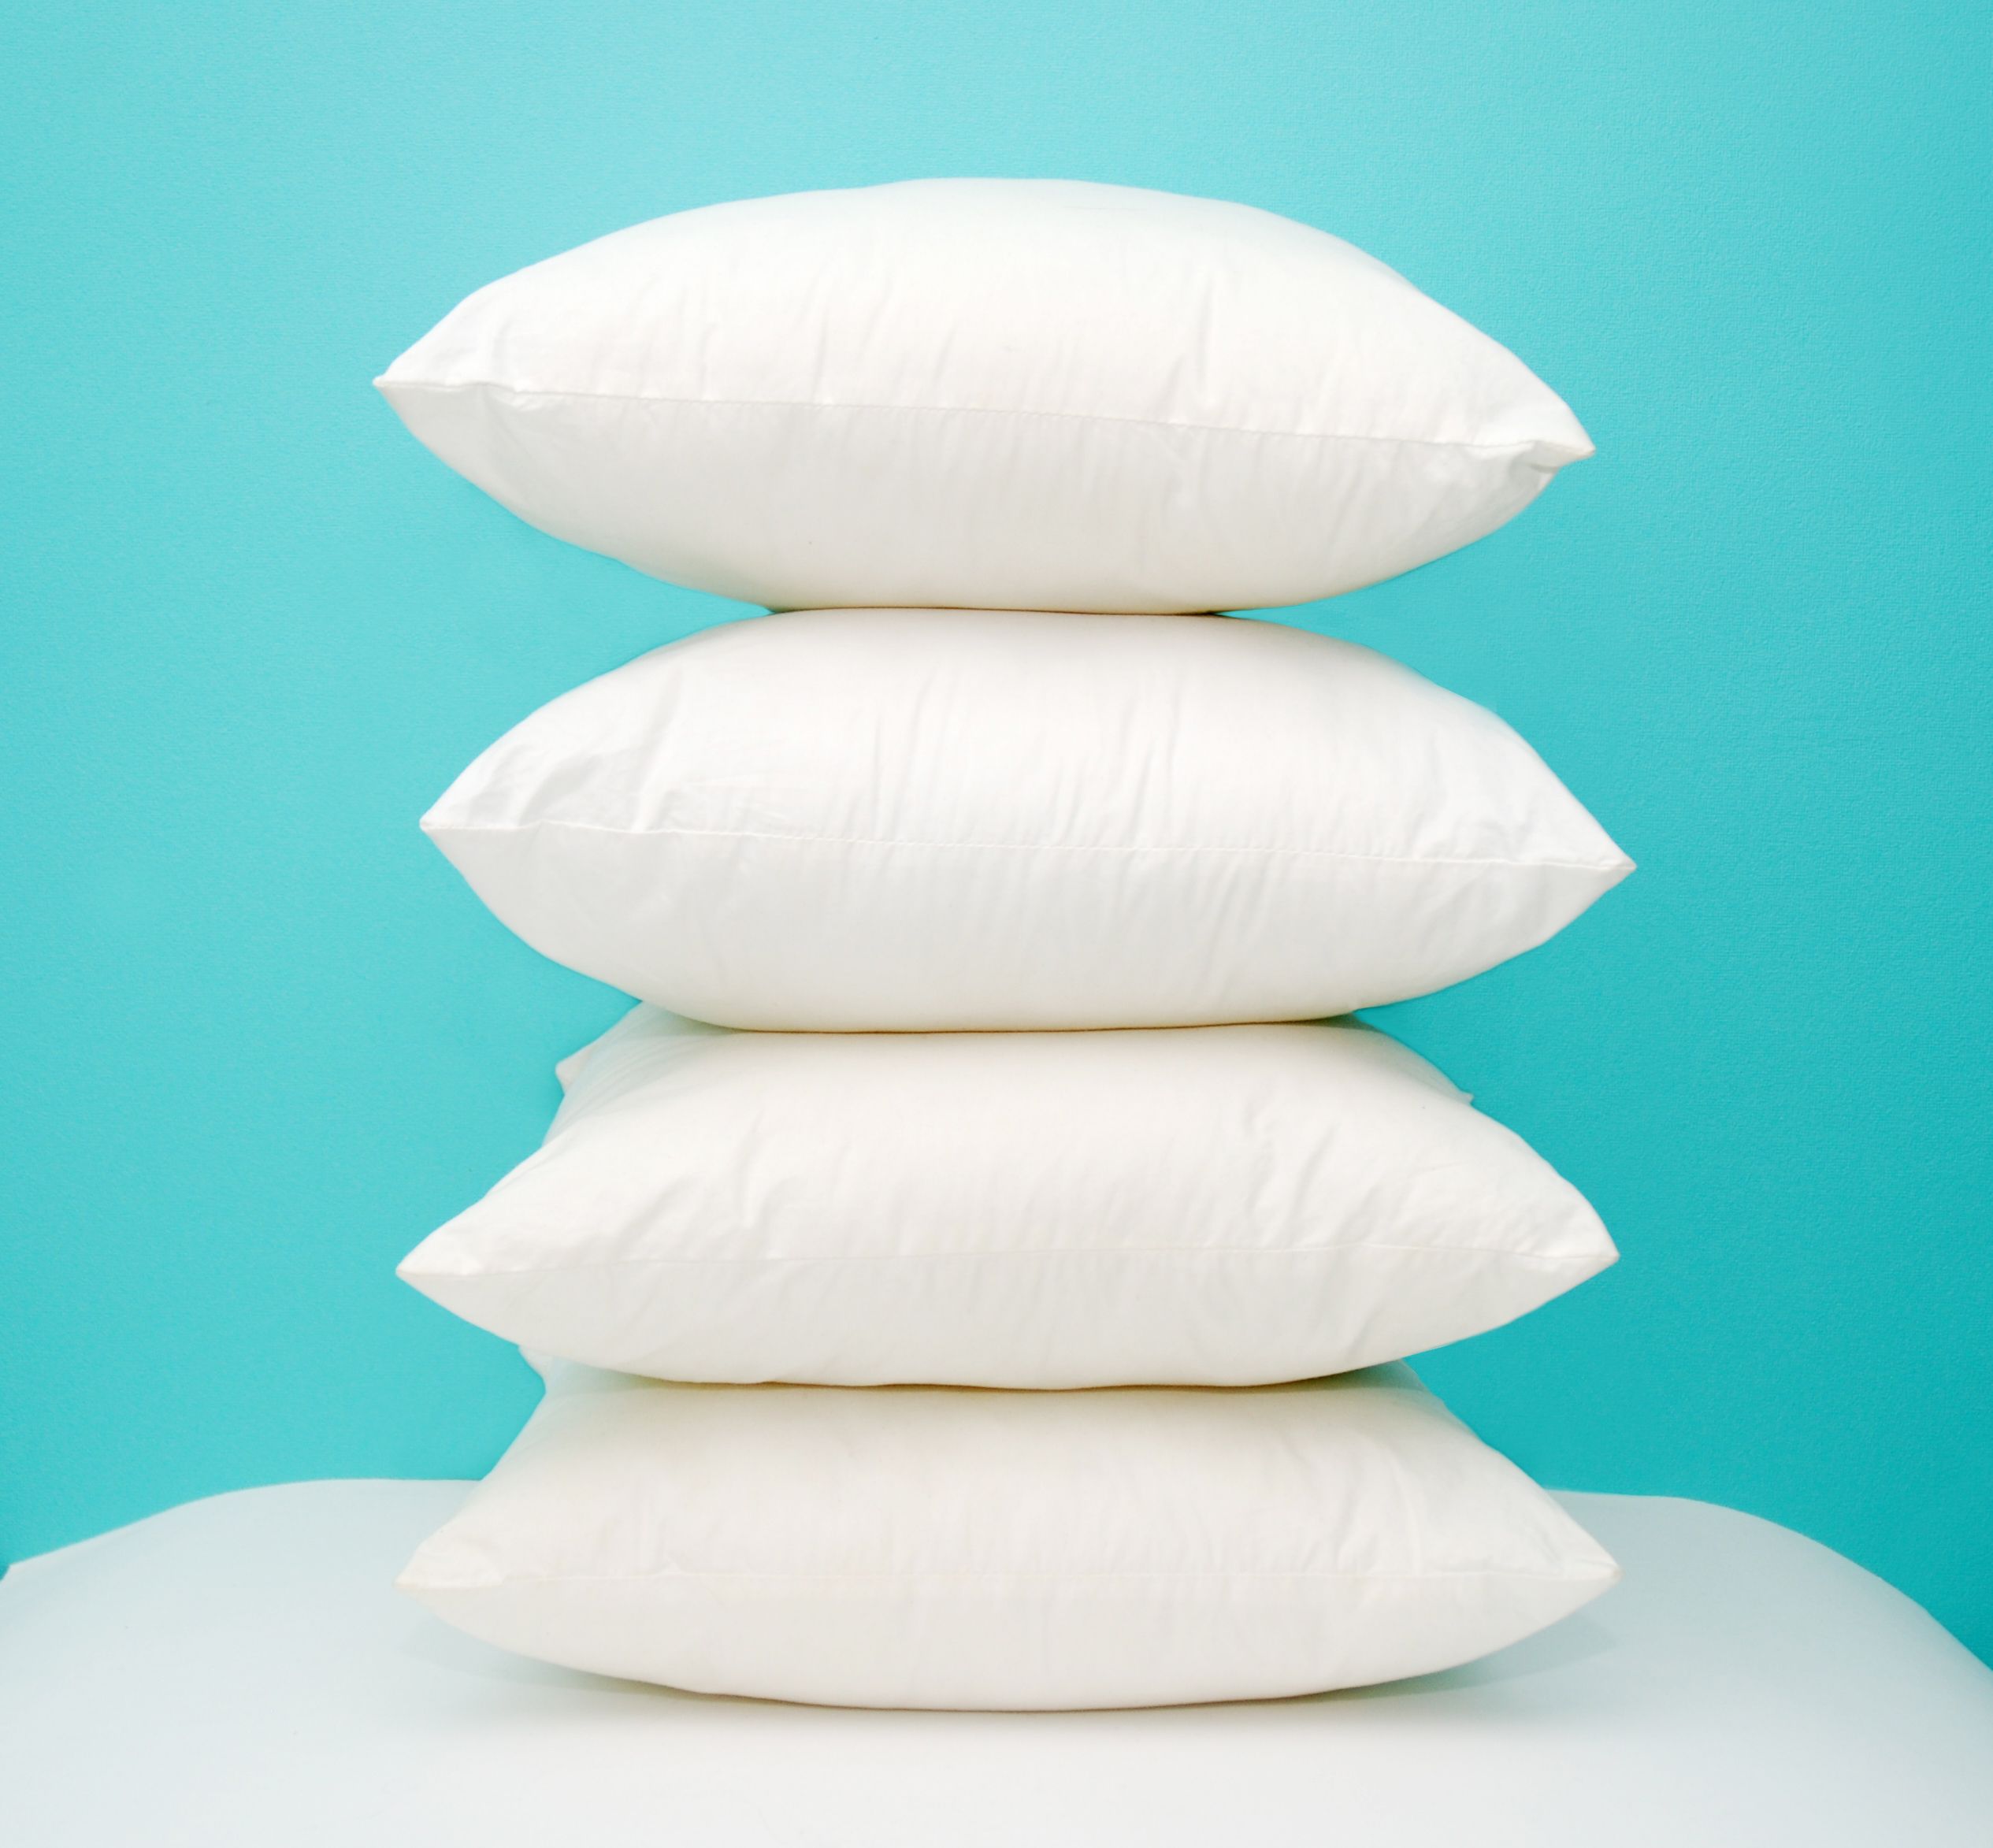 PILLOW INSERT FIT GUIDE - Tips for Styling Pillows